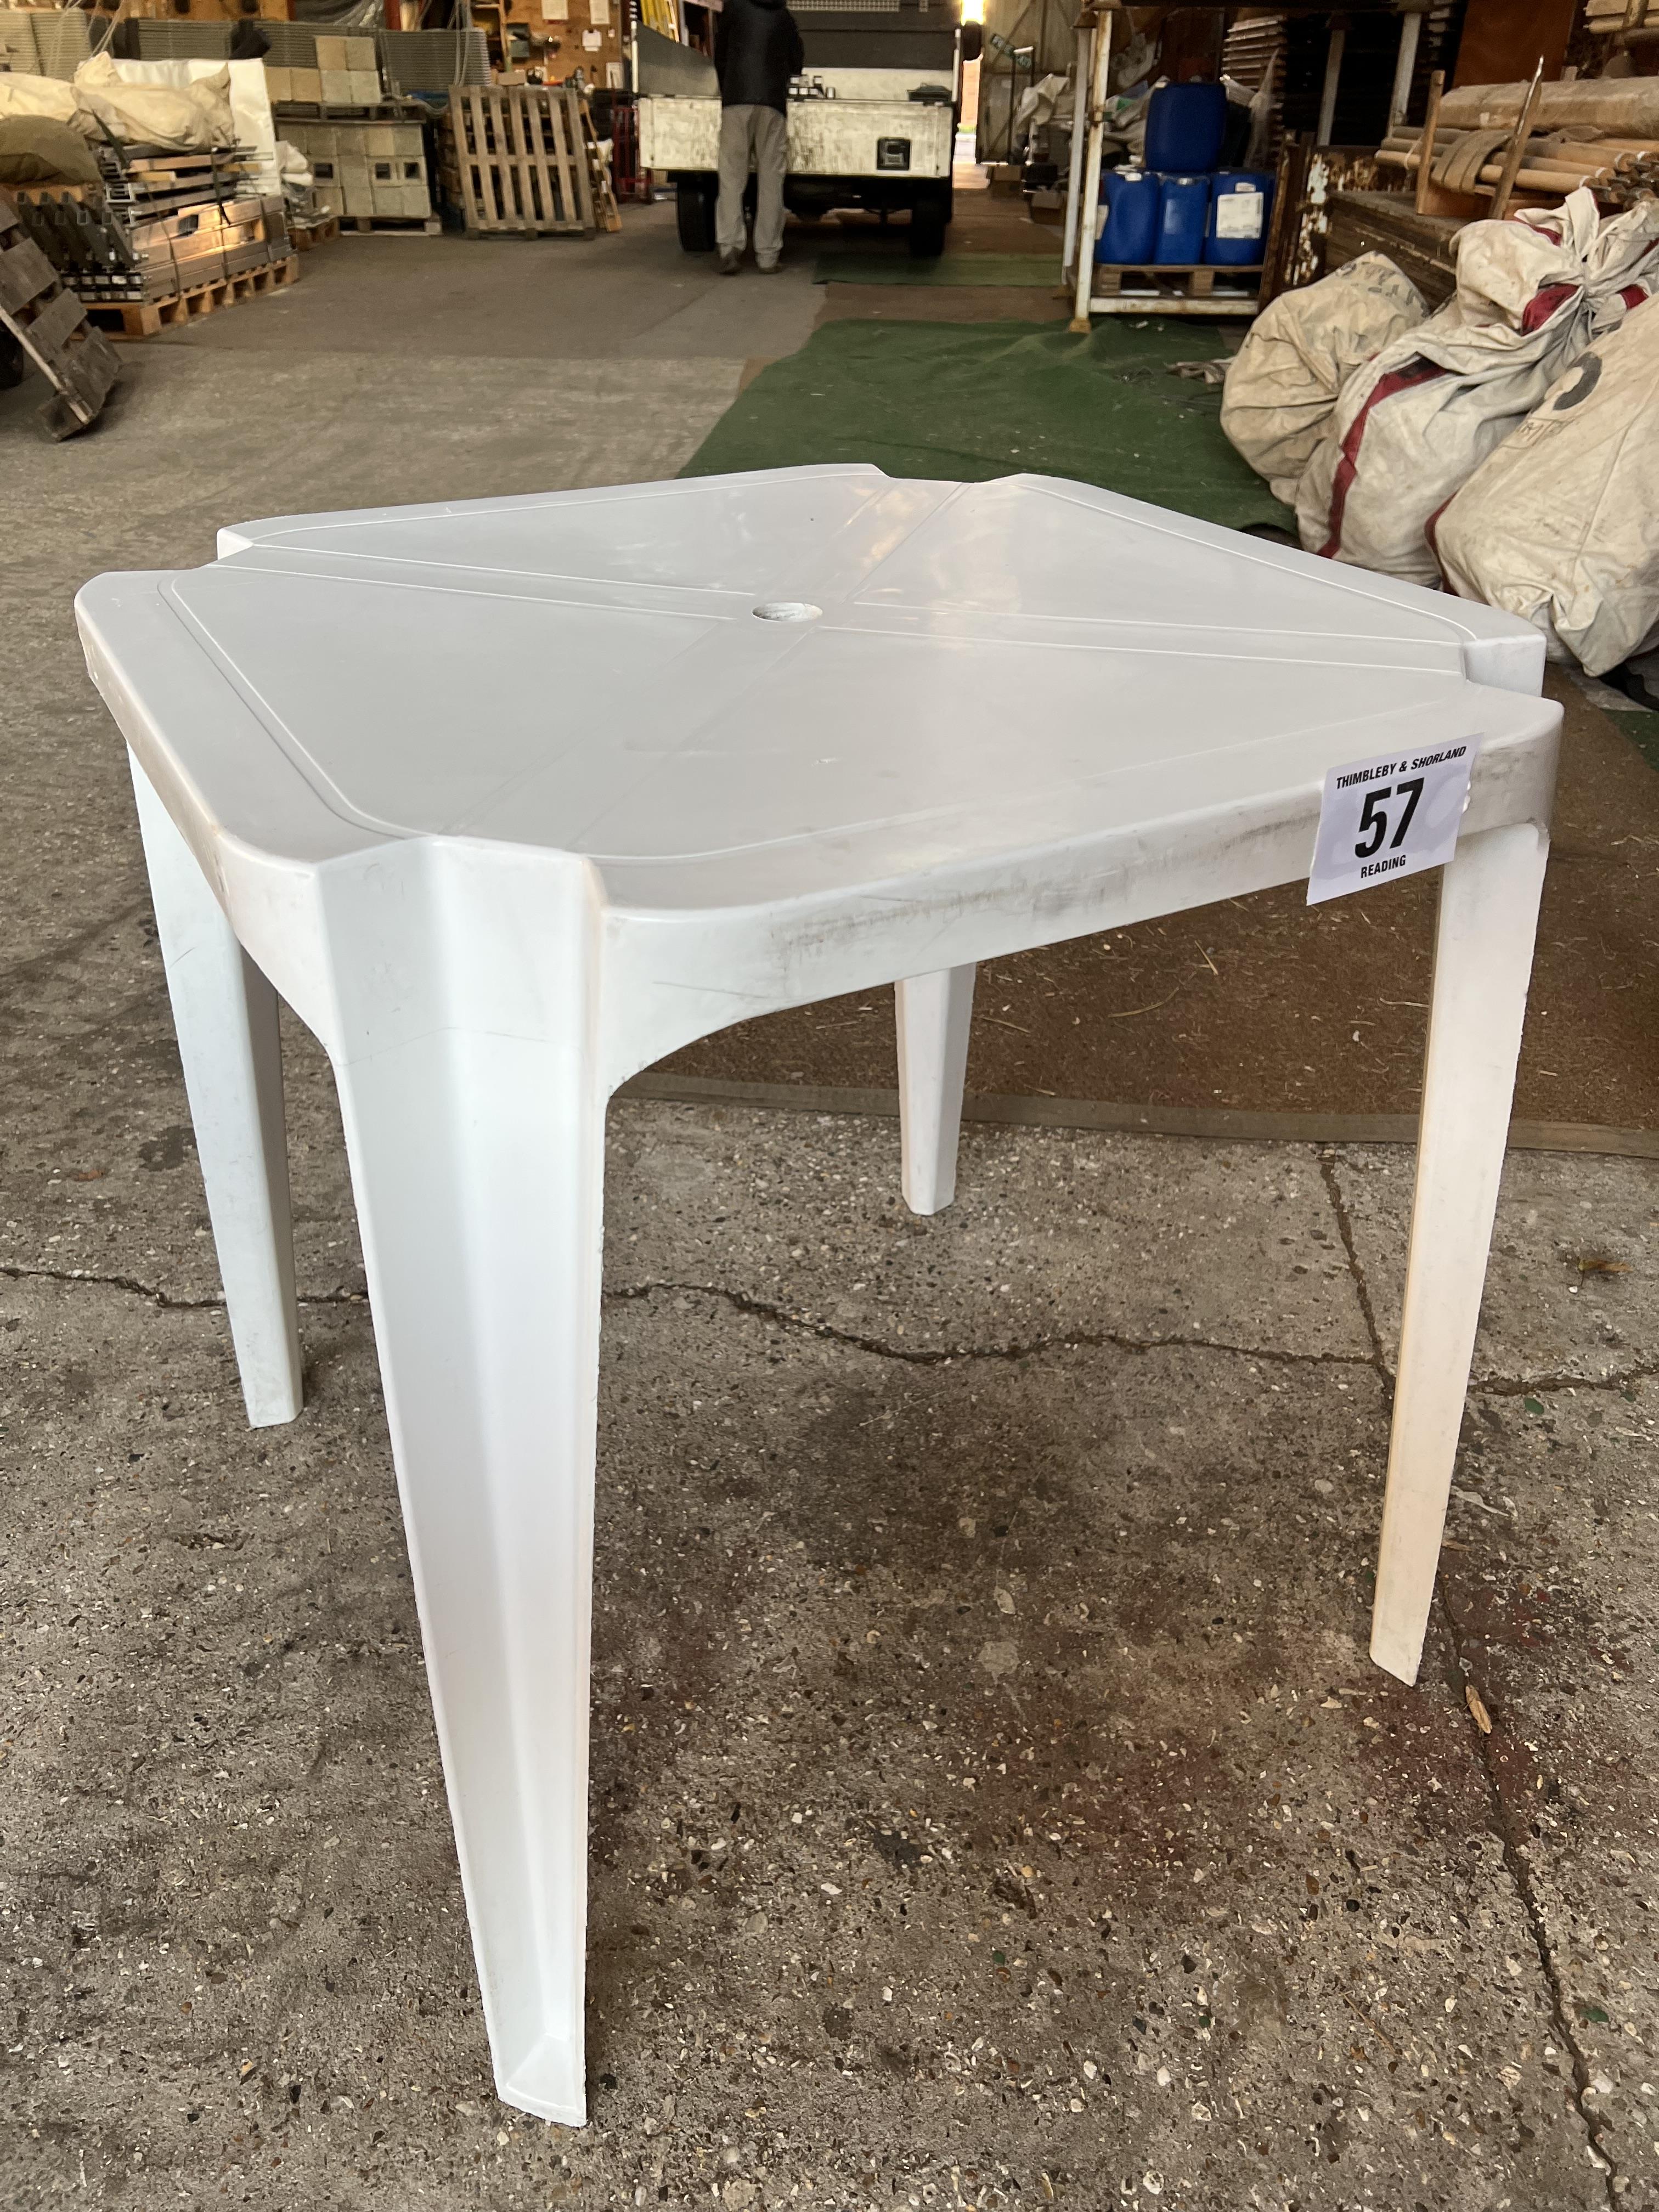 50 square white resin tables 70 x 70 x 71cms (h). This lot is subject to VAT